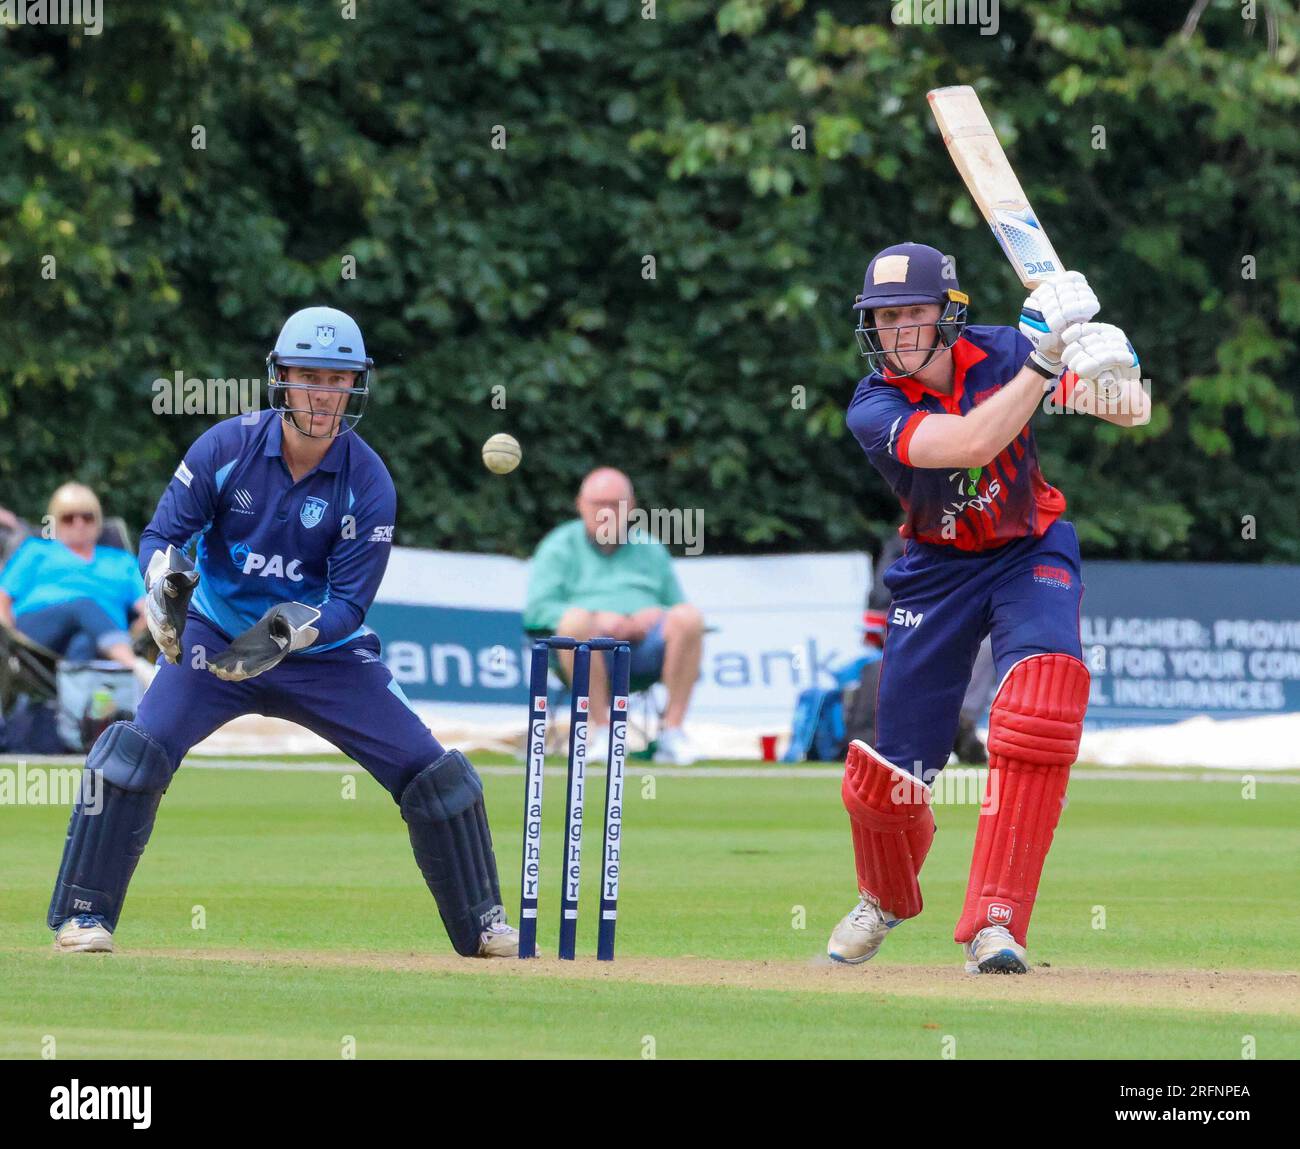 Stormont, Belfast, Northern Ireland, UK. 04 Aug 2023. The Gallagher Challenge Cup Final – Carrickfergus v Waringstown (red). Waringstown won the final by 36 runs. Waringstown 354-4 Carrickfergus 318. Morgan Topping on his way to 150 for Waringstown. Credit: David Hunter/Alamy Live New Stock Photo